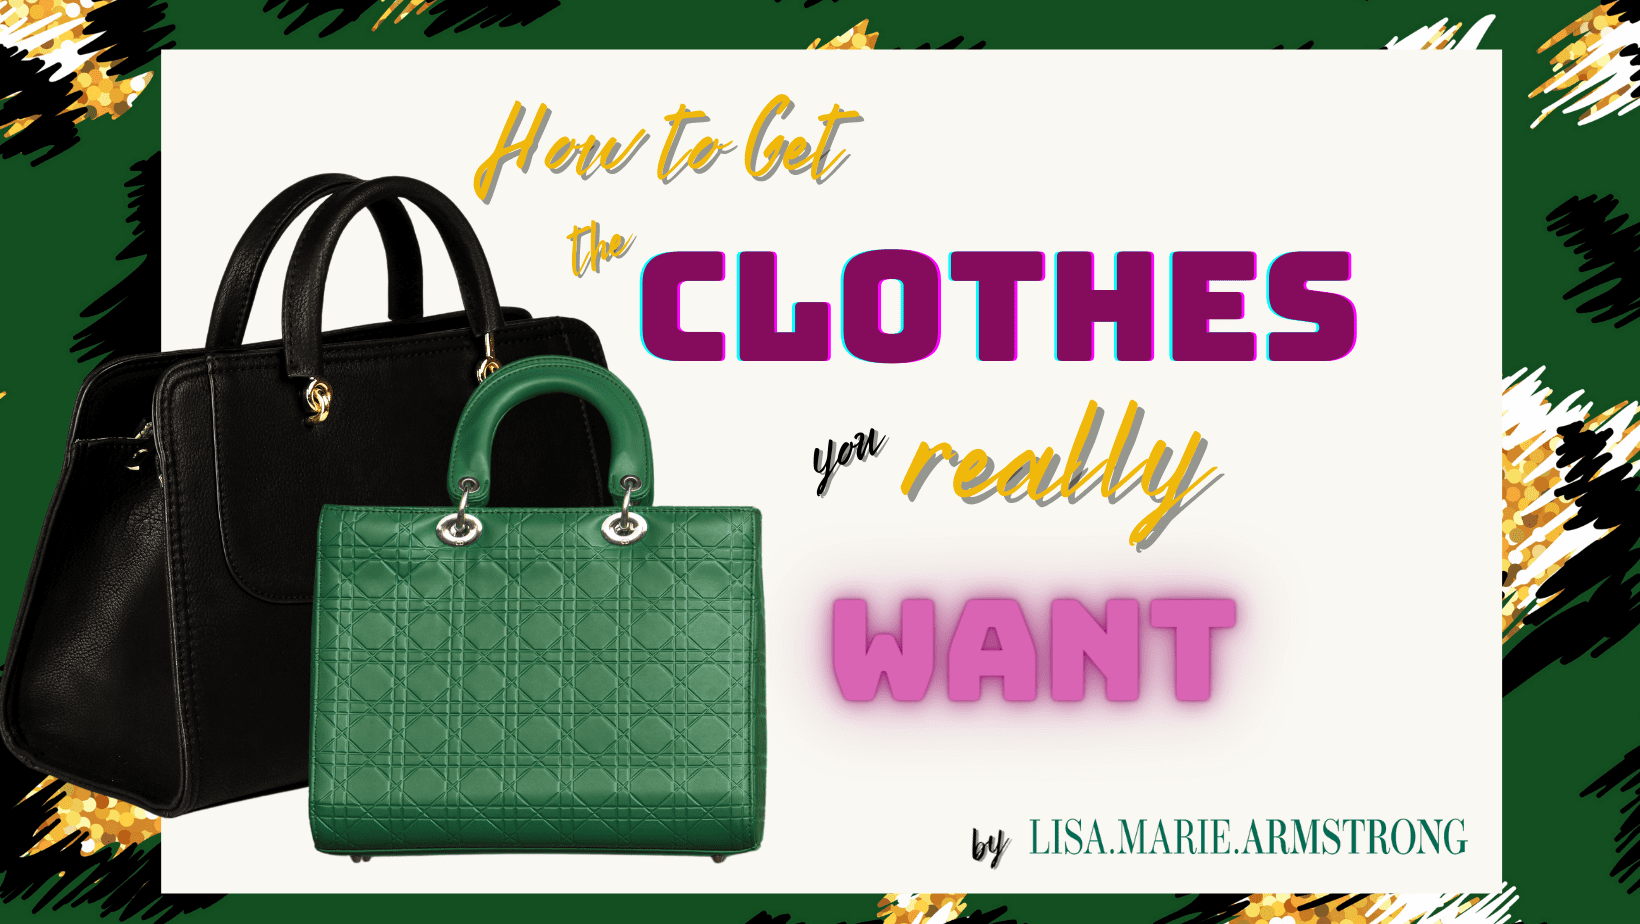 How to Get the Clothes You Really Want blog post graphic banner